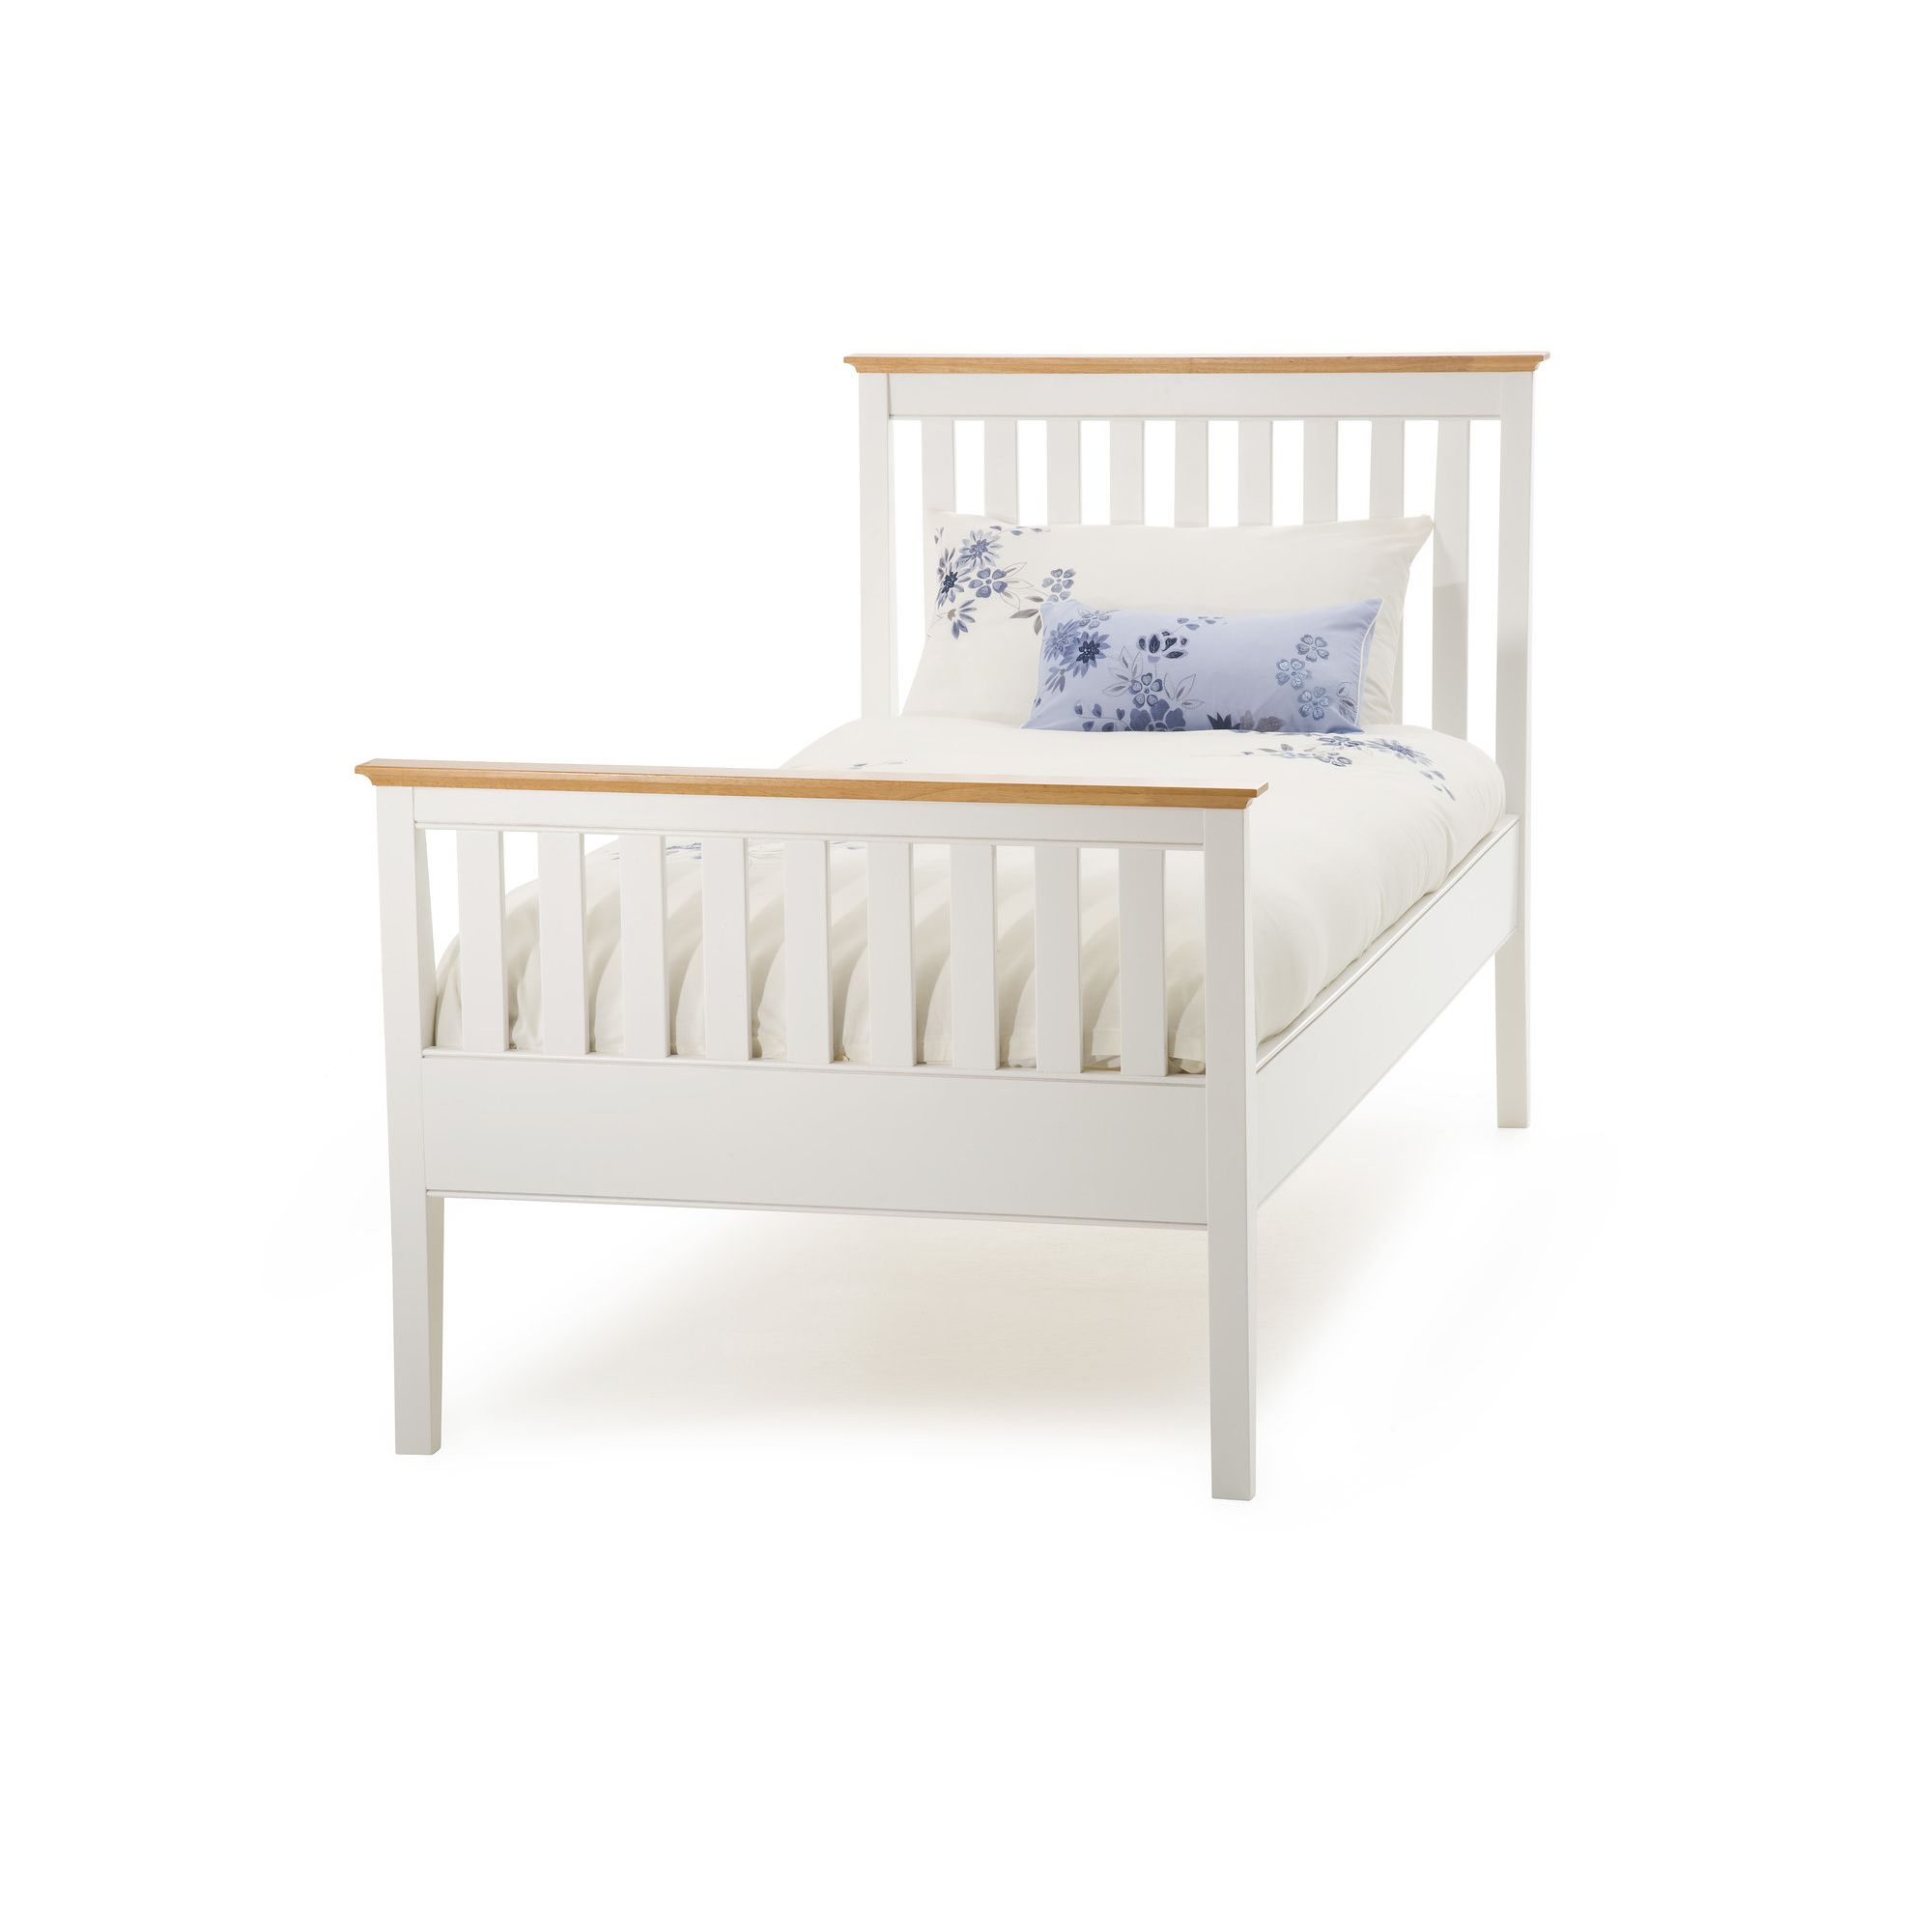 Serene Furnishings Grace High Foot End Bed - Golden Cherry - Small Double at Tesco Direct